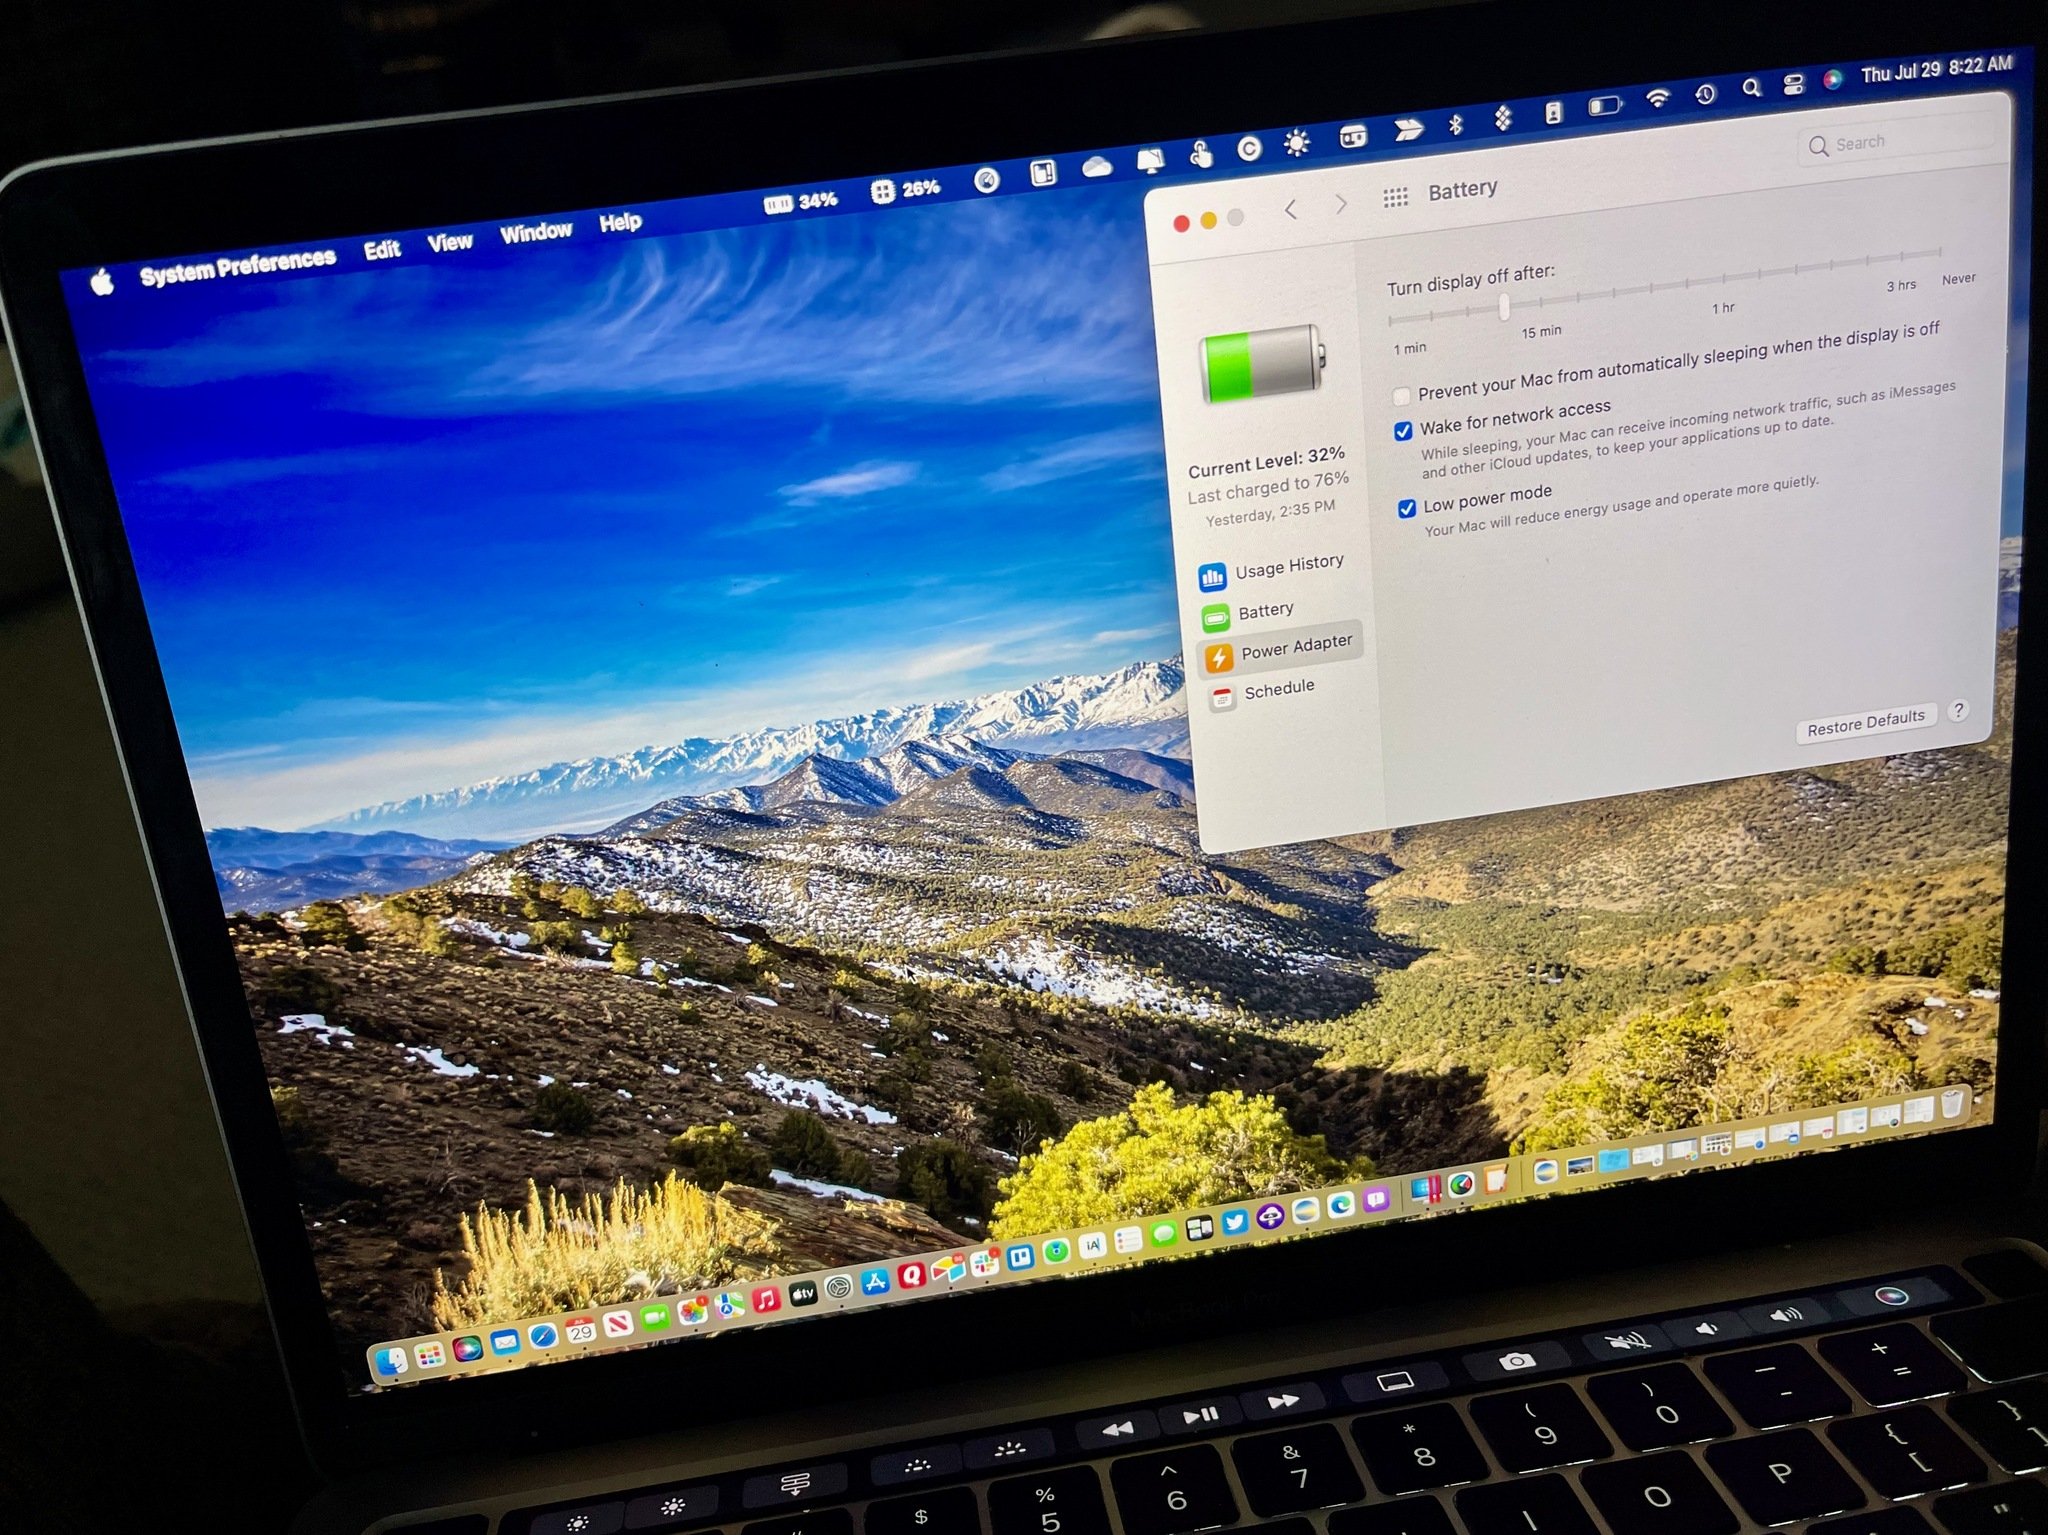 How to use Low Power Mode on Mac